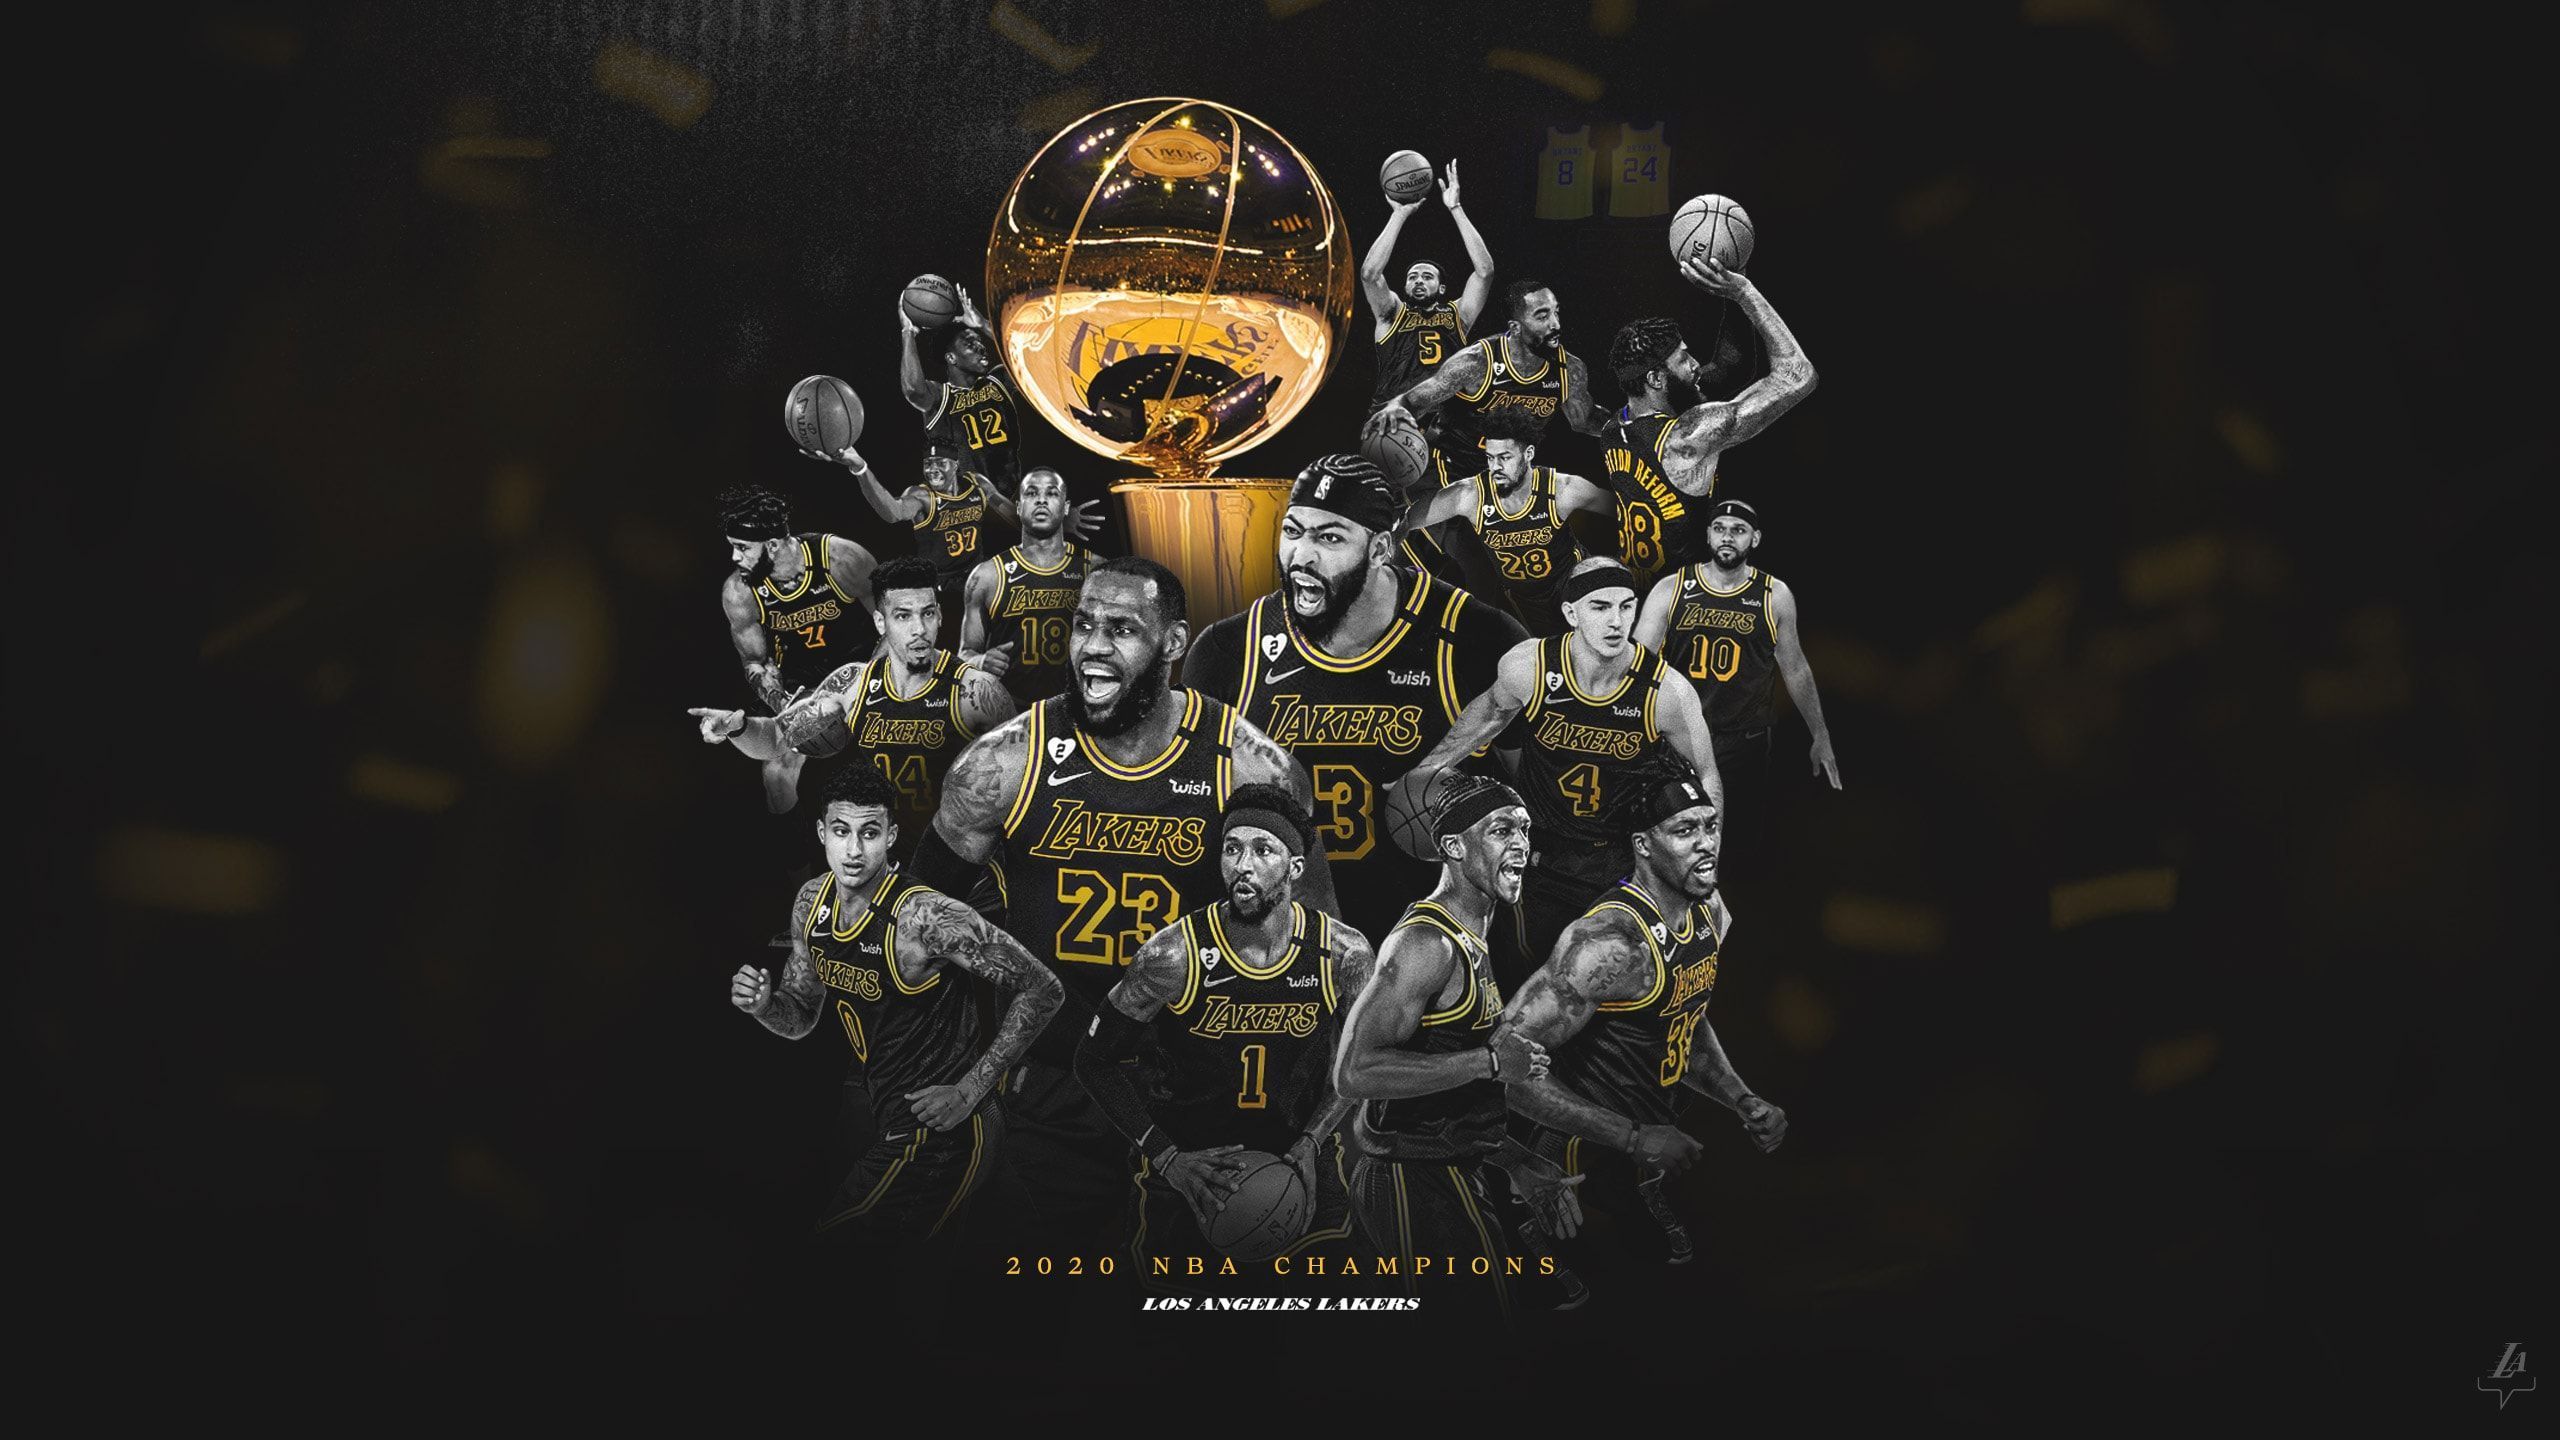 Lakers wallpaper 2020 nba champions 1920x1080 by - Los Angeles Lakers